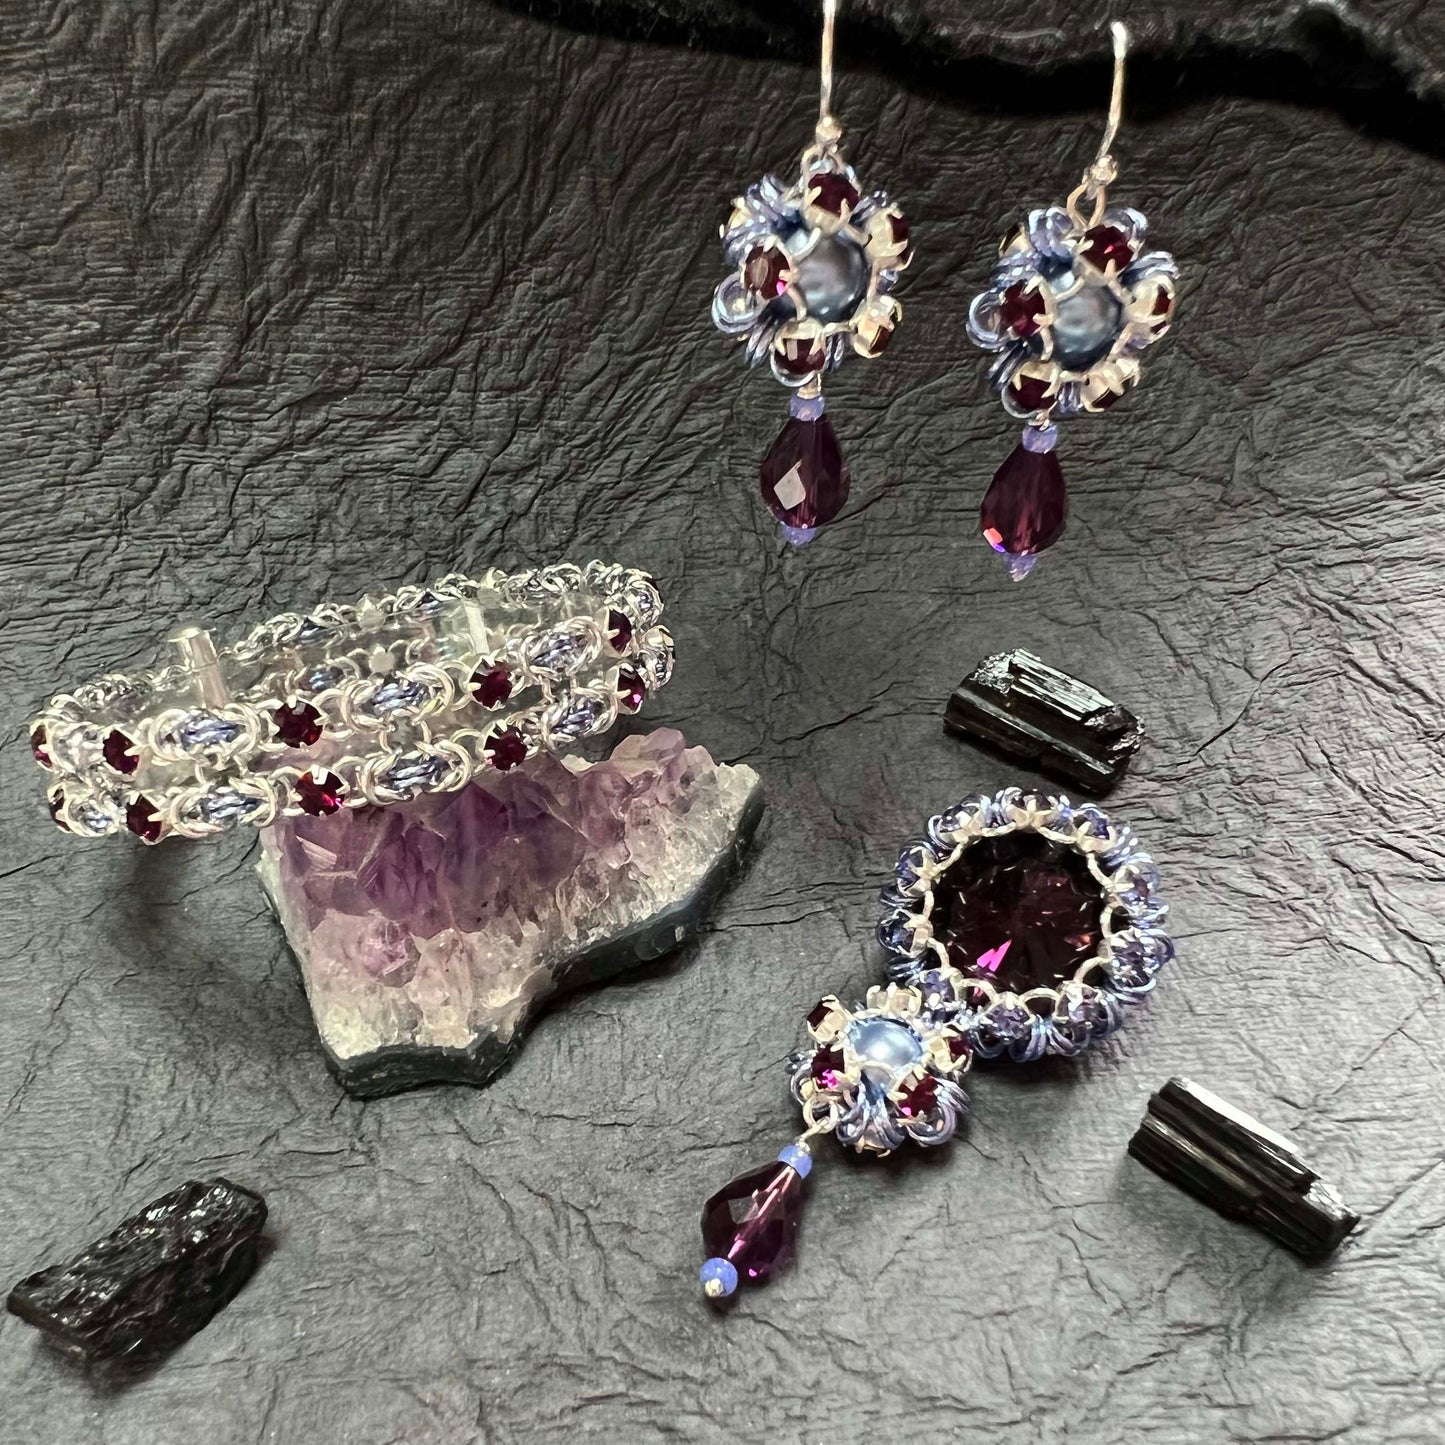 Amethyst, Periwinkle & Silver Jewelry Series PDF and Video Tutorials - no supplies included